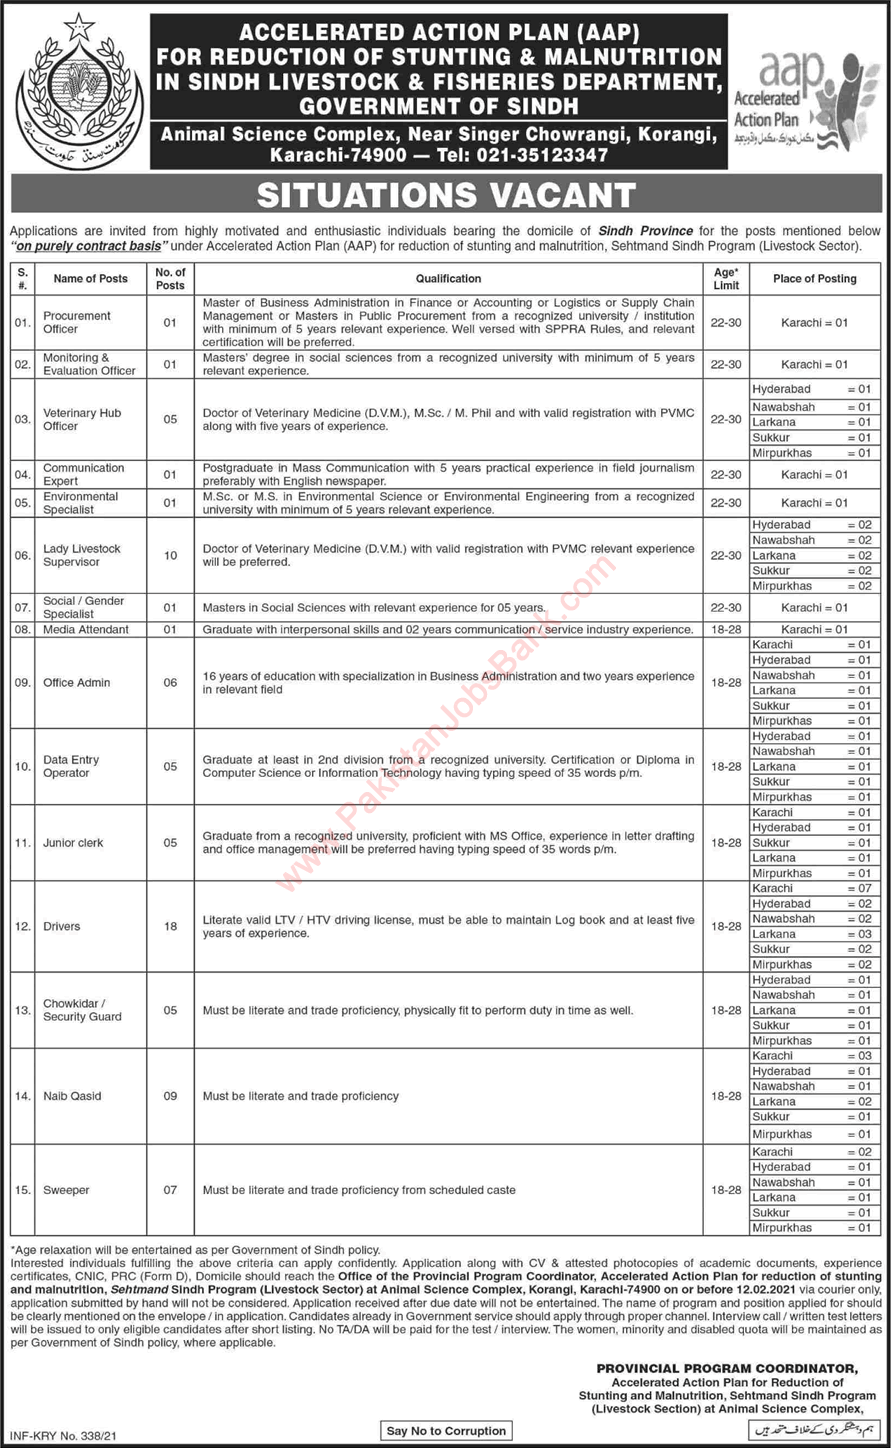 Livestock and Fisheries Department Sindh Jobs 2021 Accelerated Action Plan AAP Latest